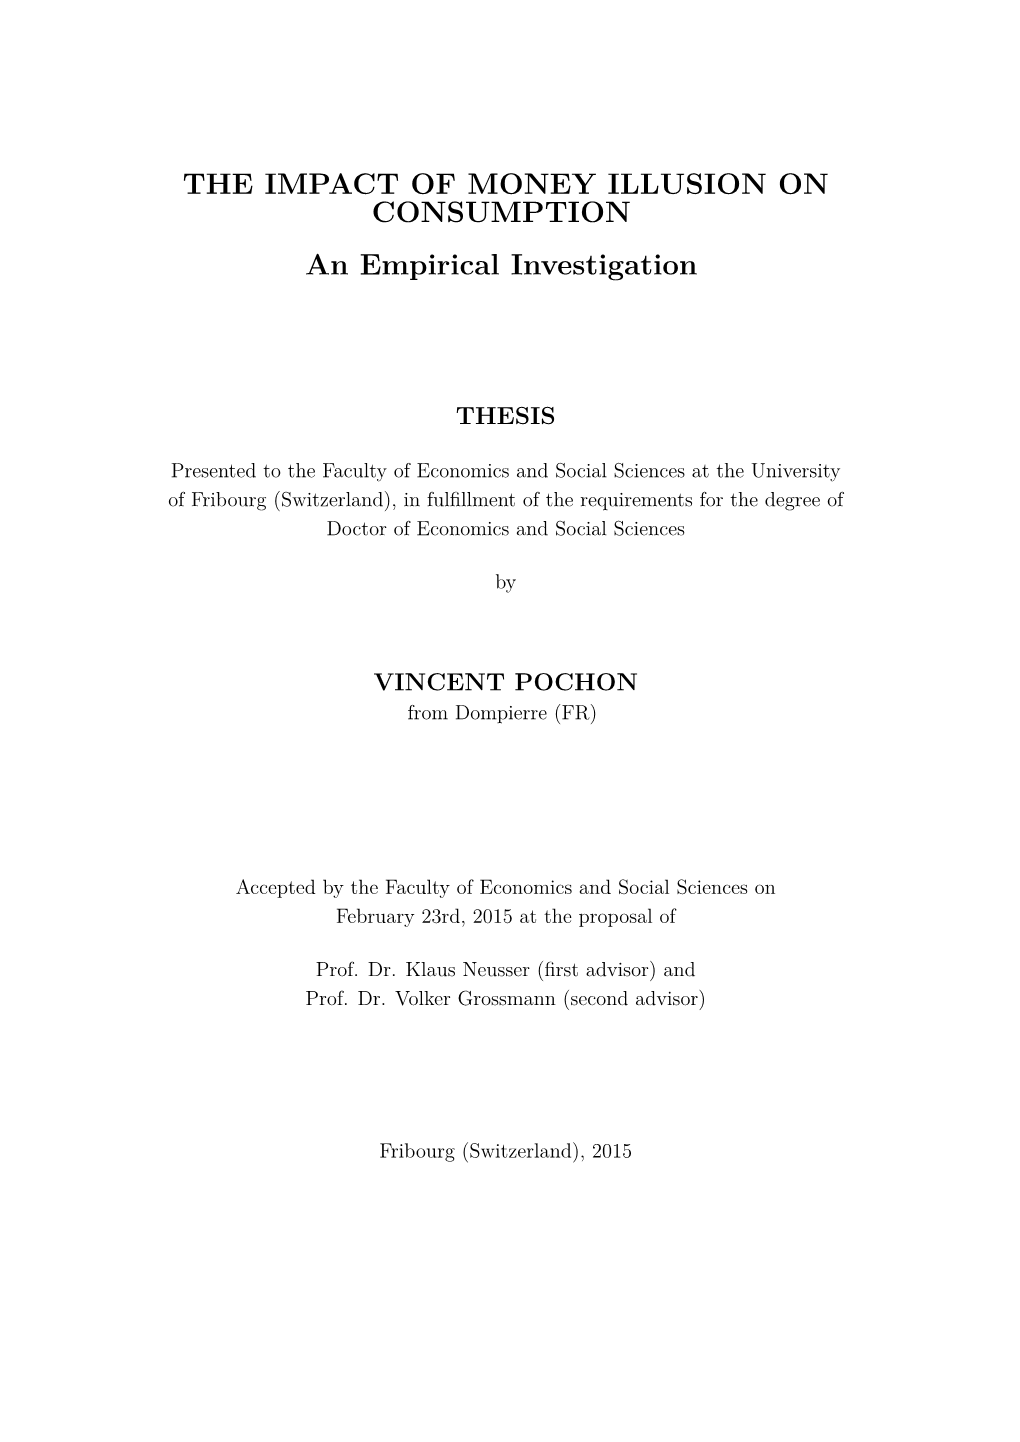 THE IMPACT of MONEY ILLUSION on CONSUMPTION an Empirical Investigation